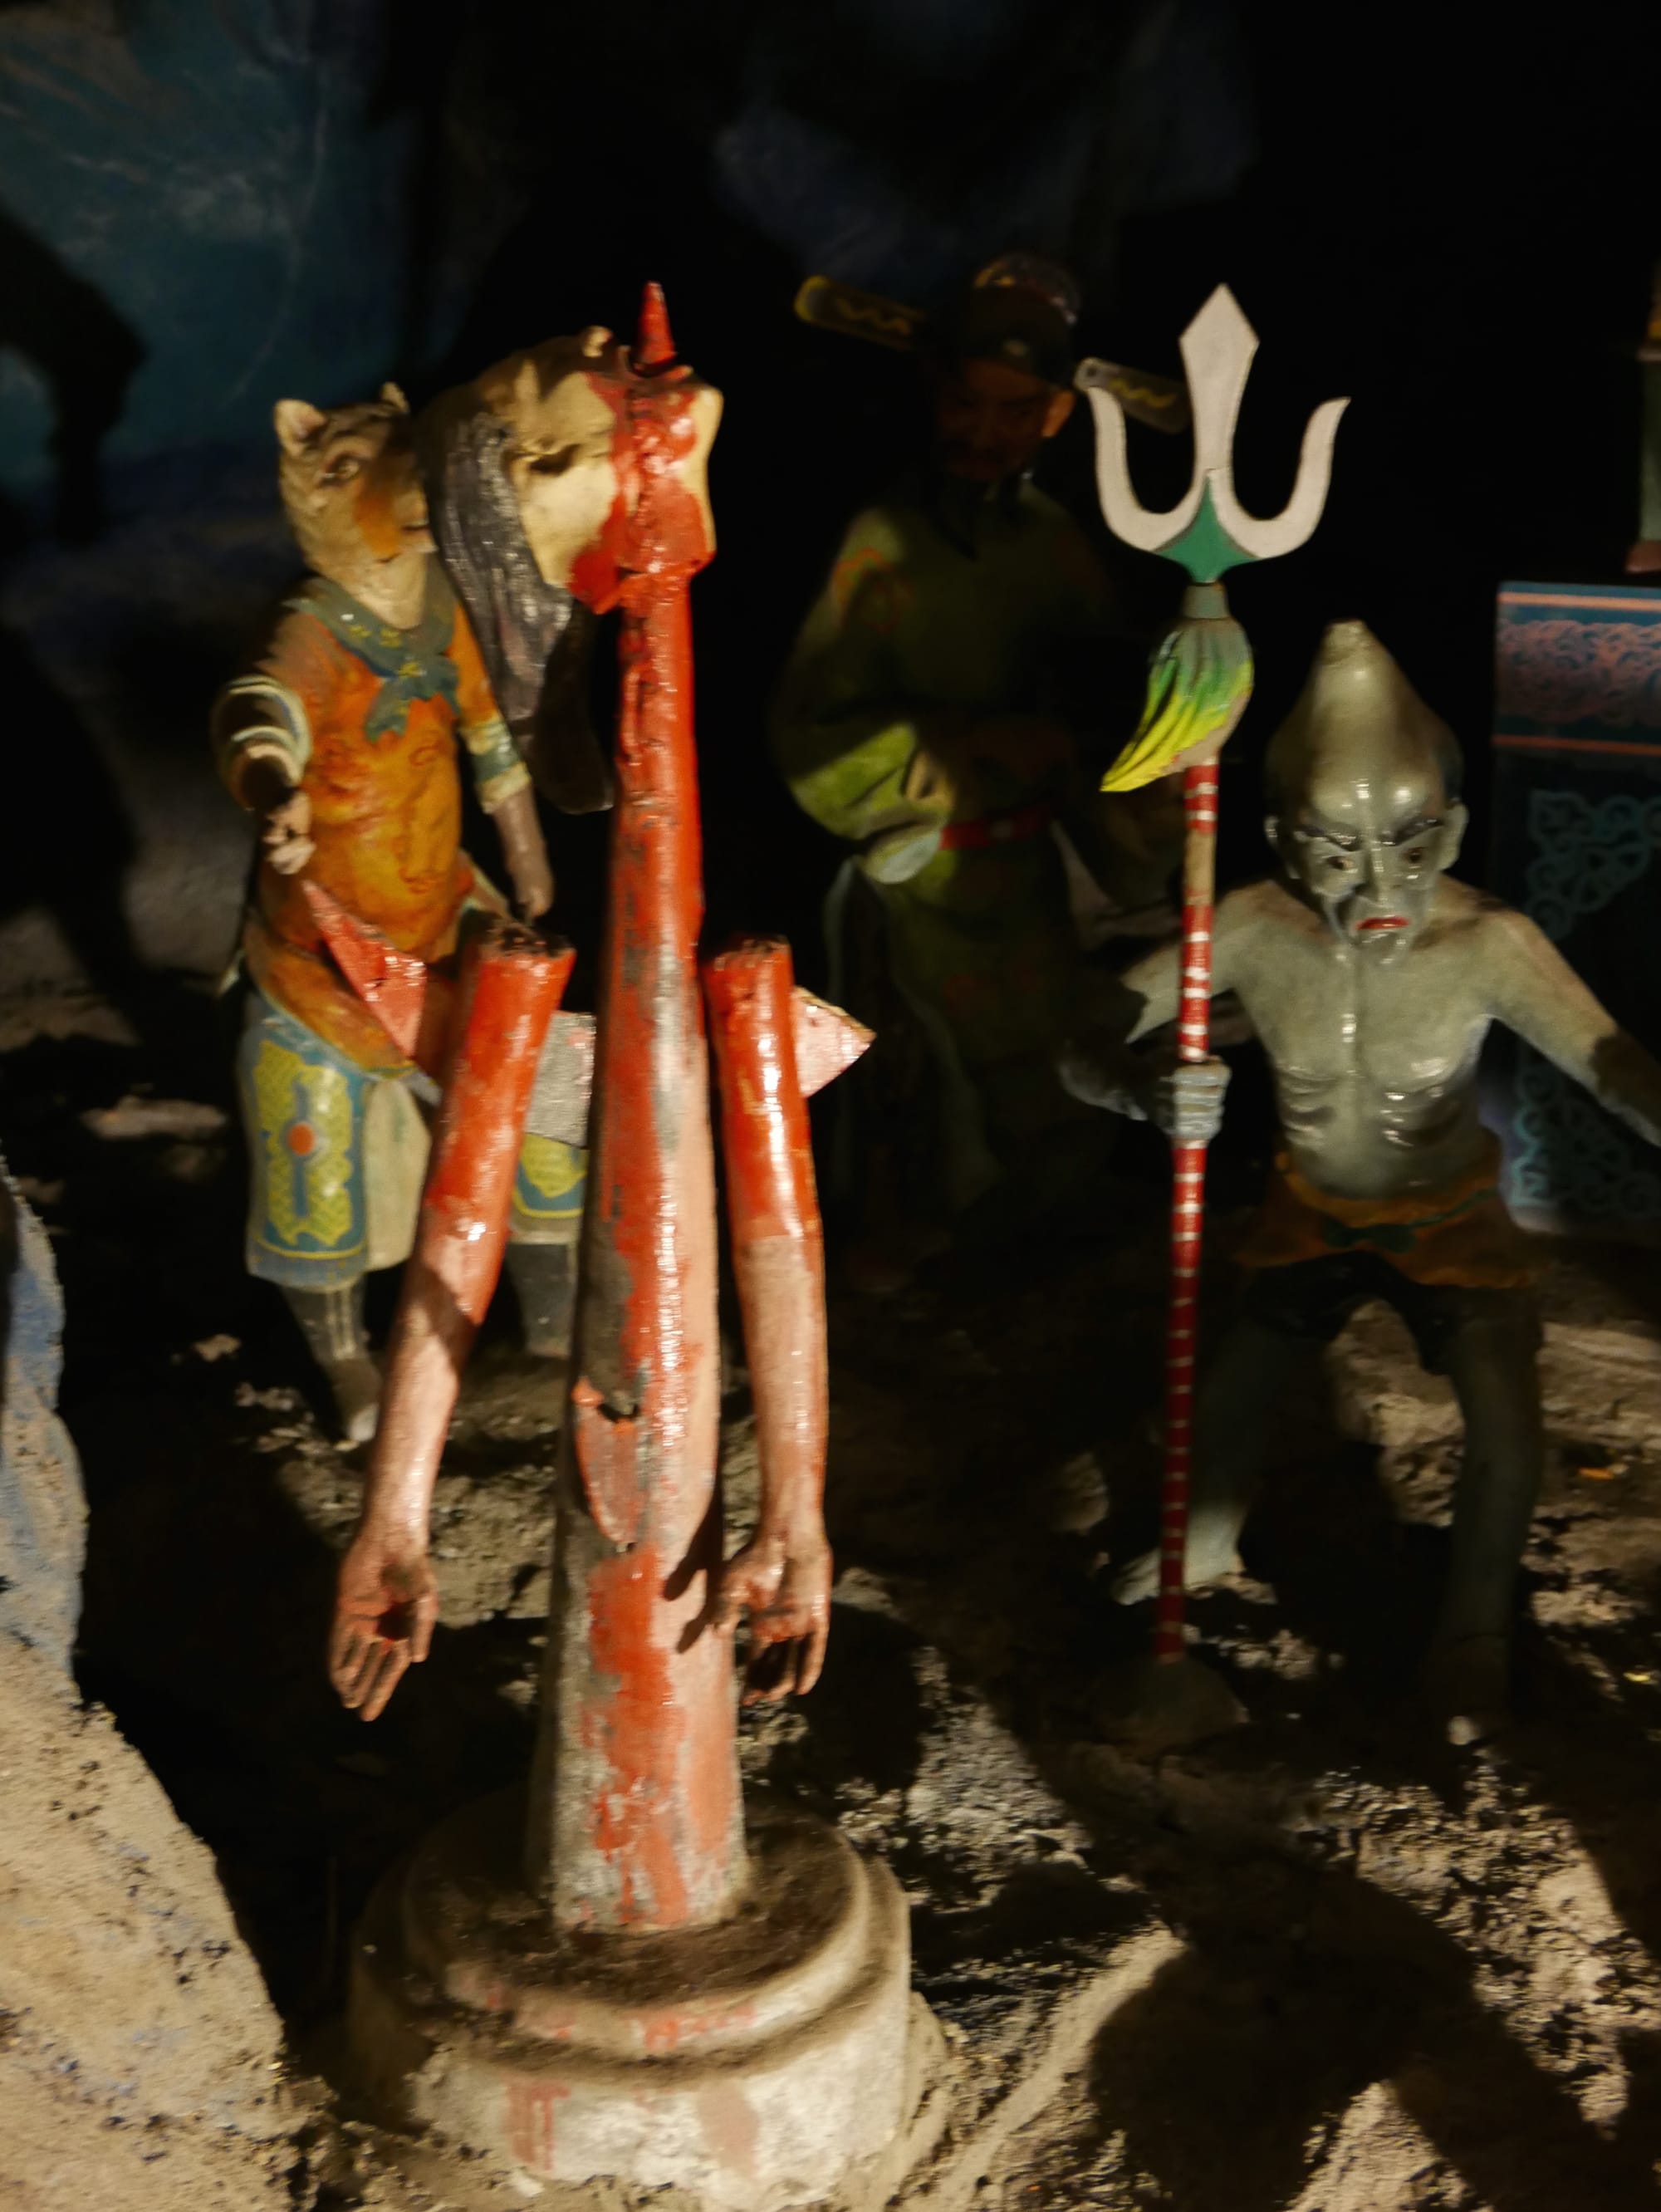 Photo by Author — head and arms chopped off — the Ninth Court of Hell (King Pingdeng) — 10 Courts of Hell, Haw Par Villa, Singapore